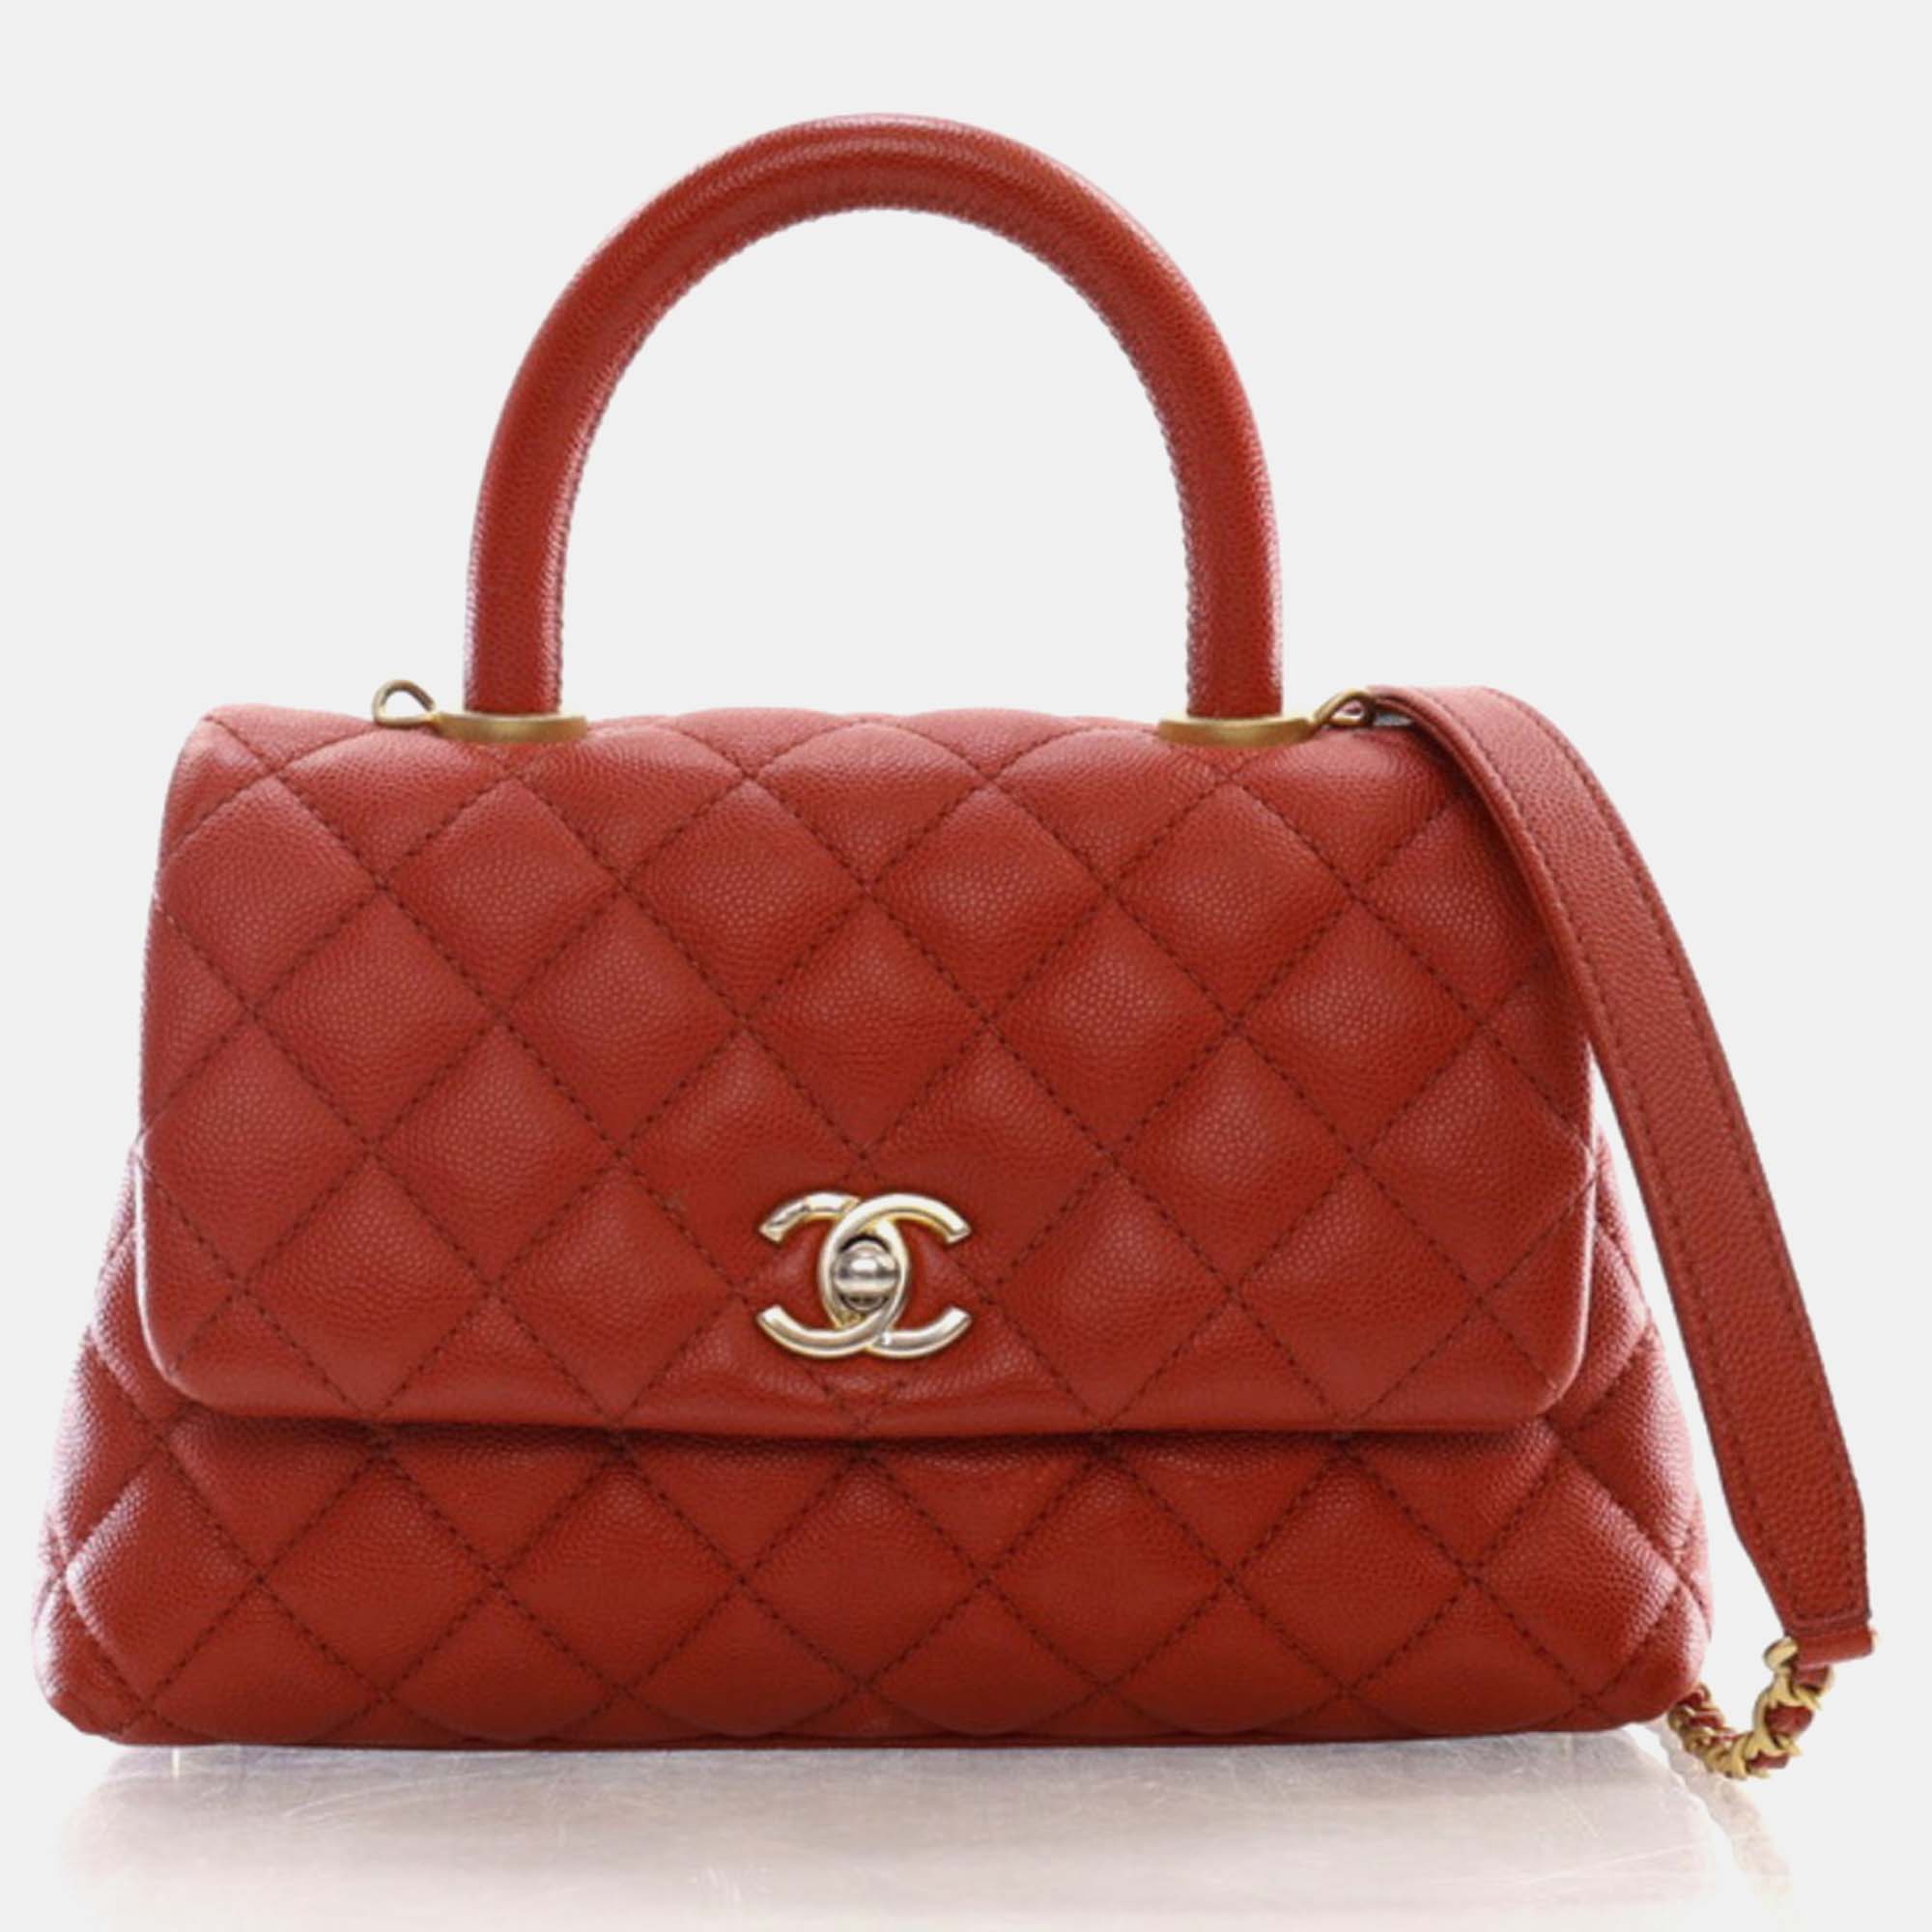 Chanel red leather small coco handle top handle bags